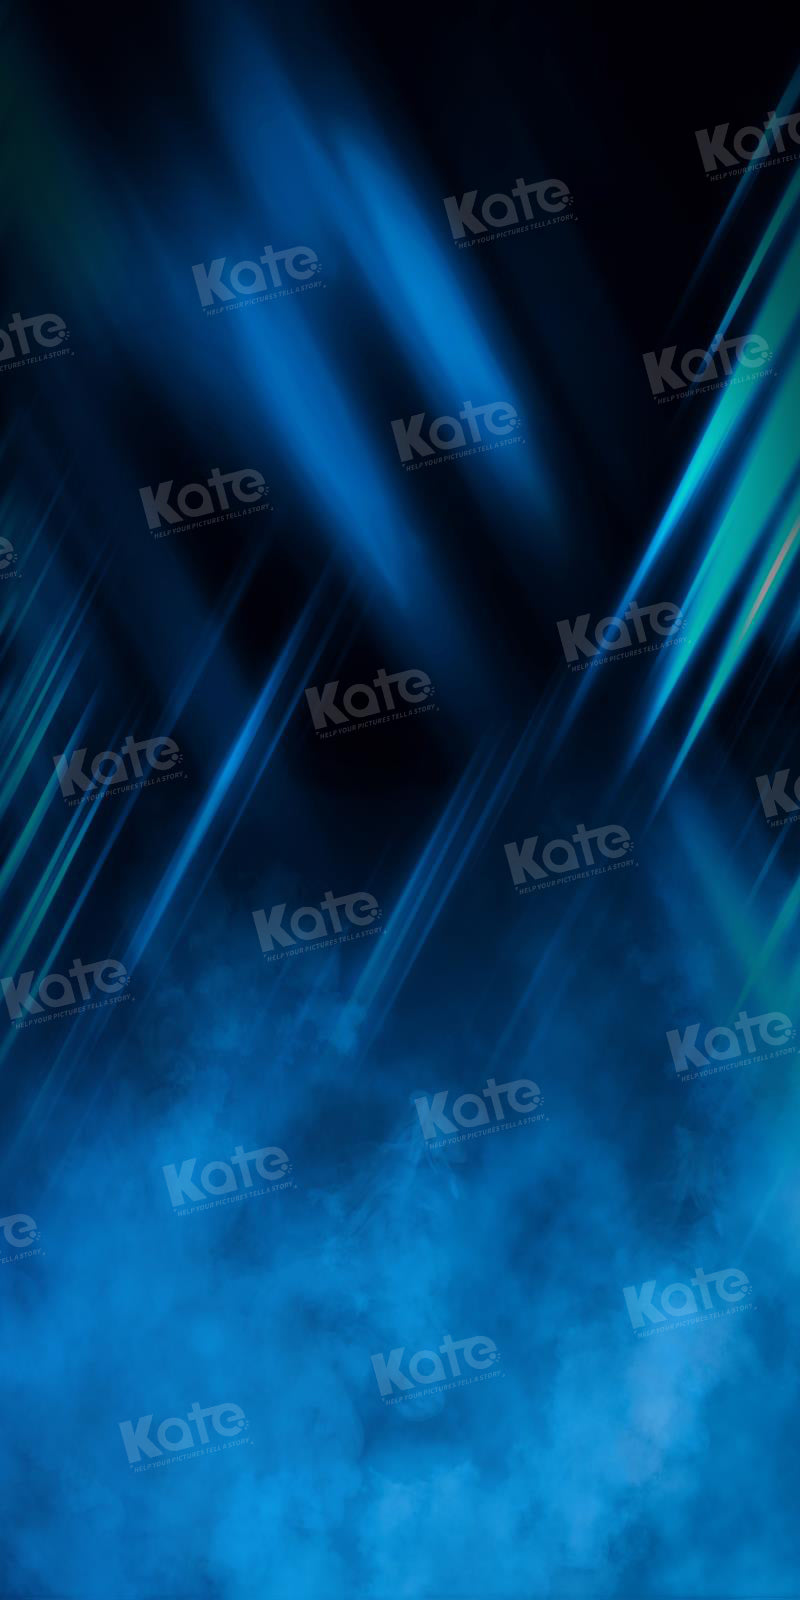 Kate Sweep Abstract Blue Texture Rock Backdrop for Photography